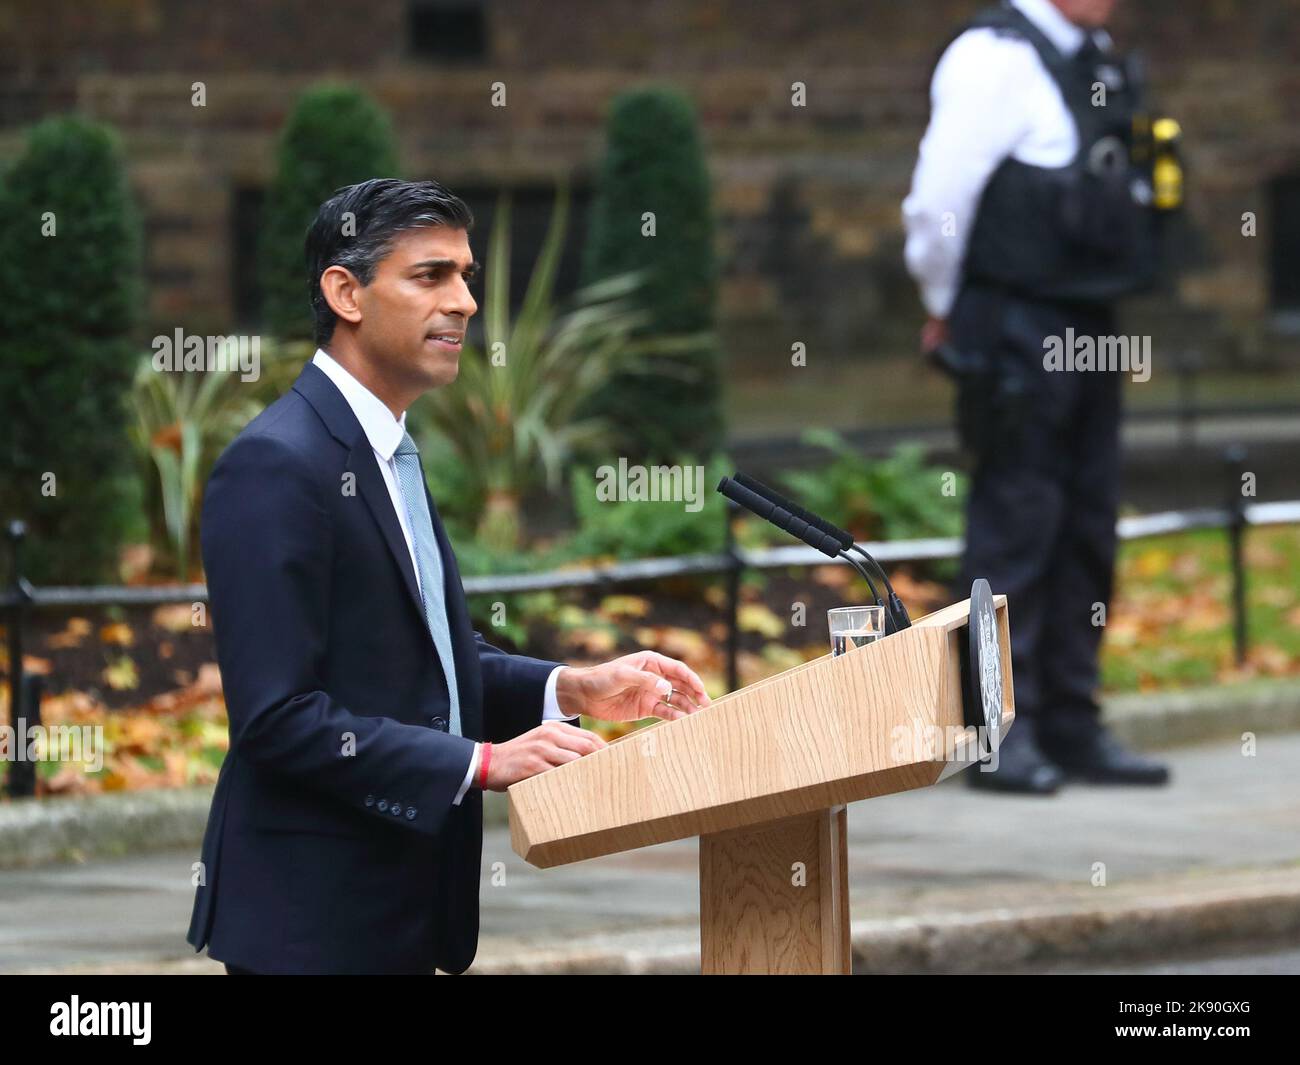 London, UK. 25th October 2022. Newly appointed Prime Minister Rishi Sunak arrived at Downing Street No 10 where he outlined the focus for his government in his speech. Credit: Uwe Deffner/Alamy Live News Stock Photo